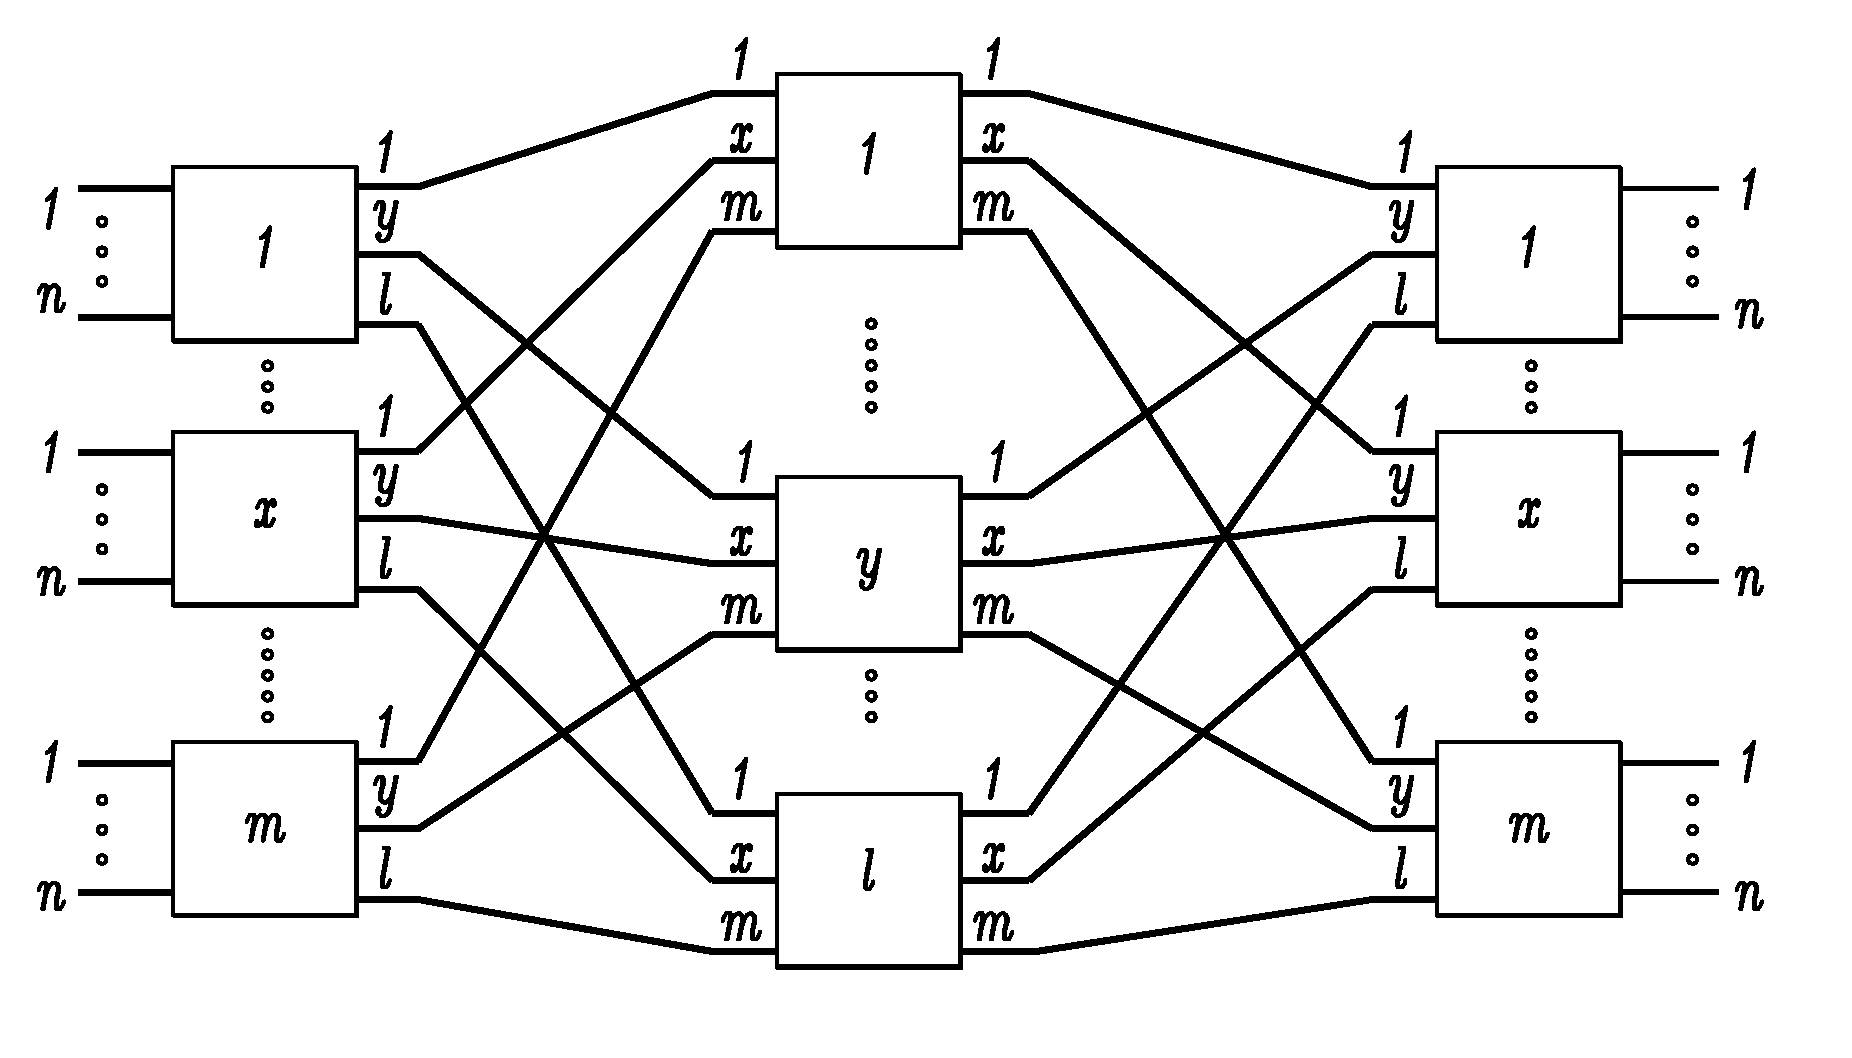 Load balancing algorithms in non-blocking multistage packet switches